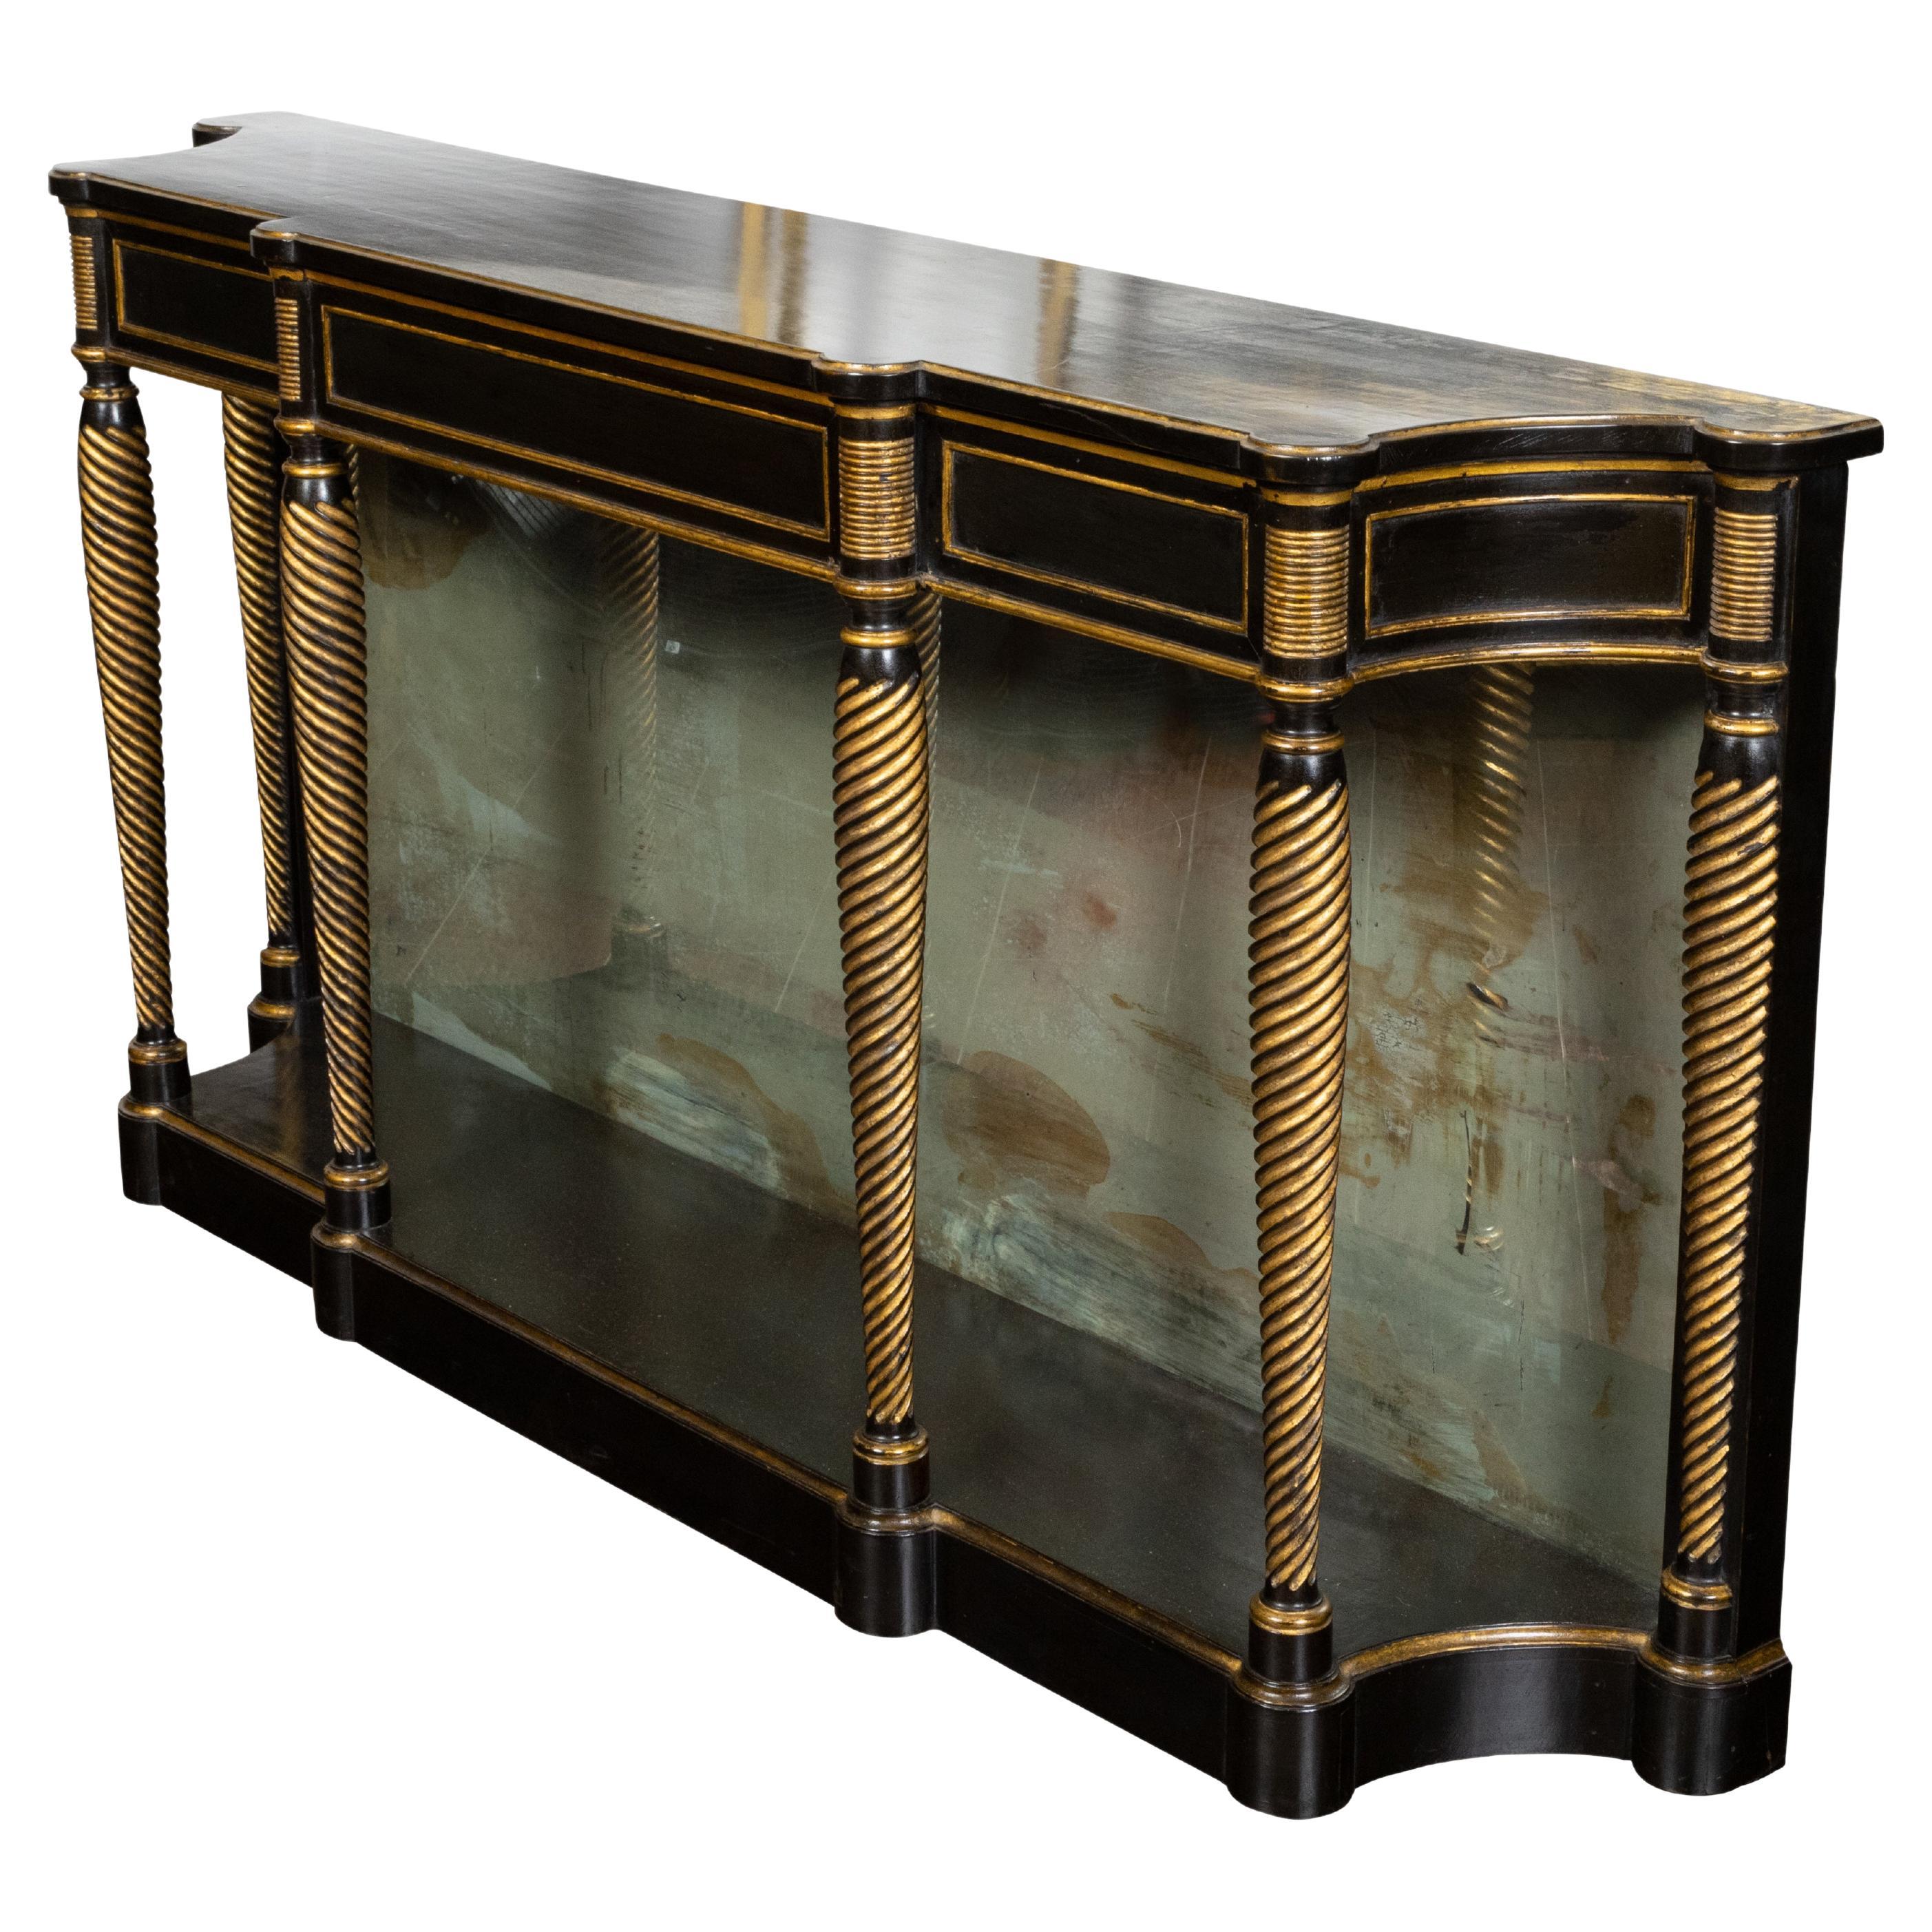 English Regency Style 1920s Gold and Black Ebonized Console Table with Mirror